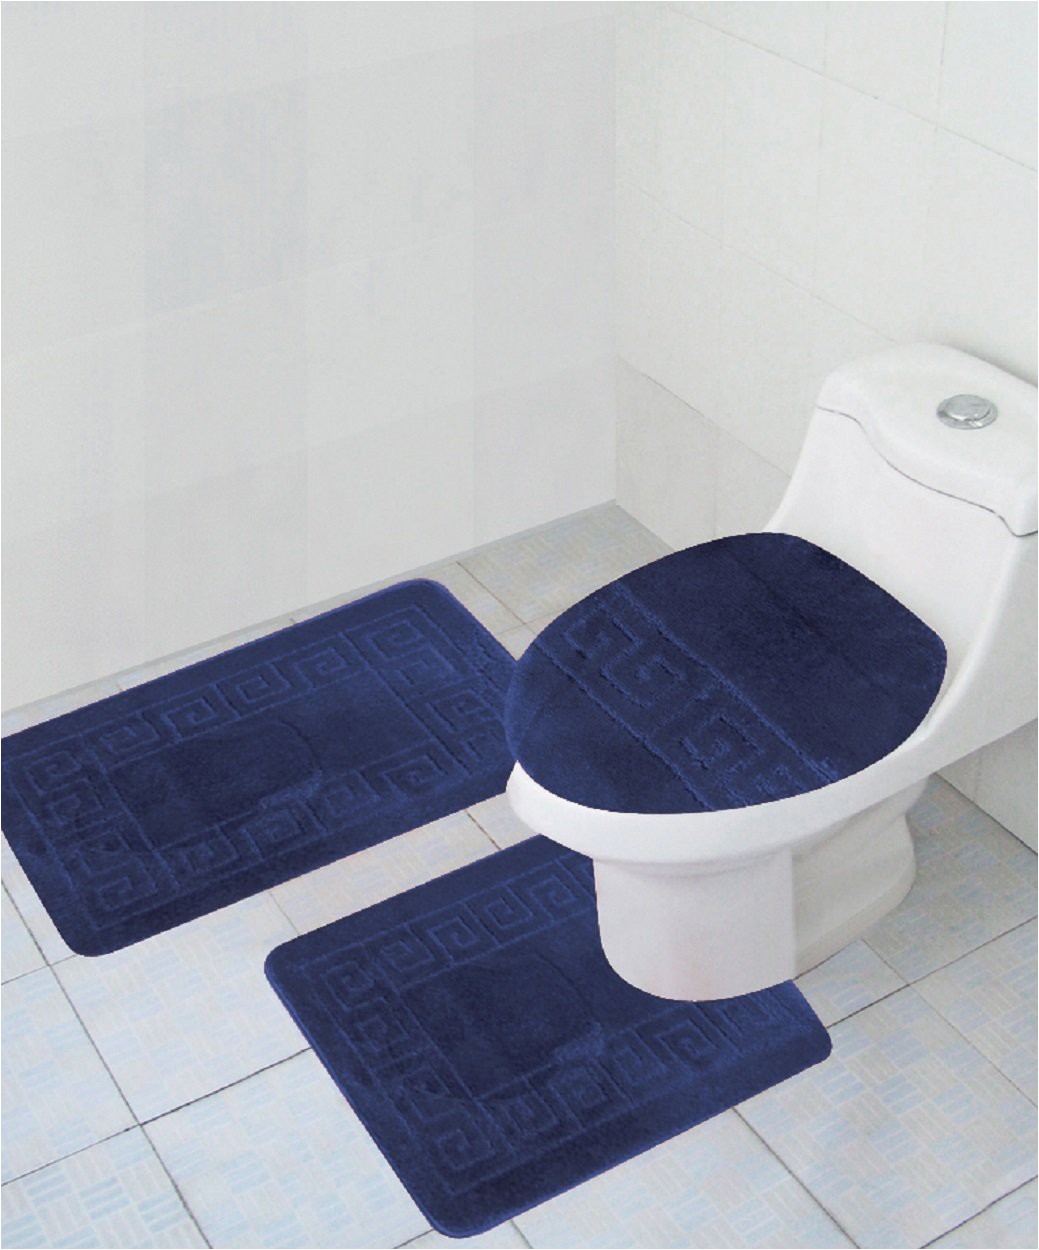 Jcpenney Bath Rugs Carpet Jcpenney Bathroom Rugs Sets Image Of Bathroom and Closet